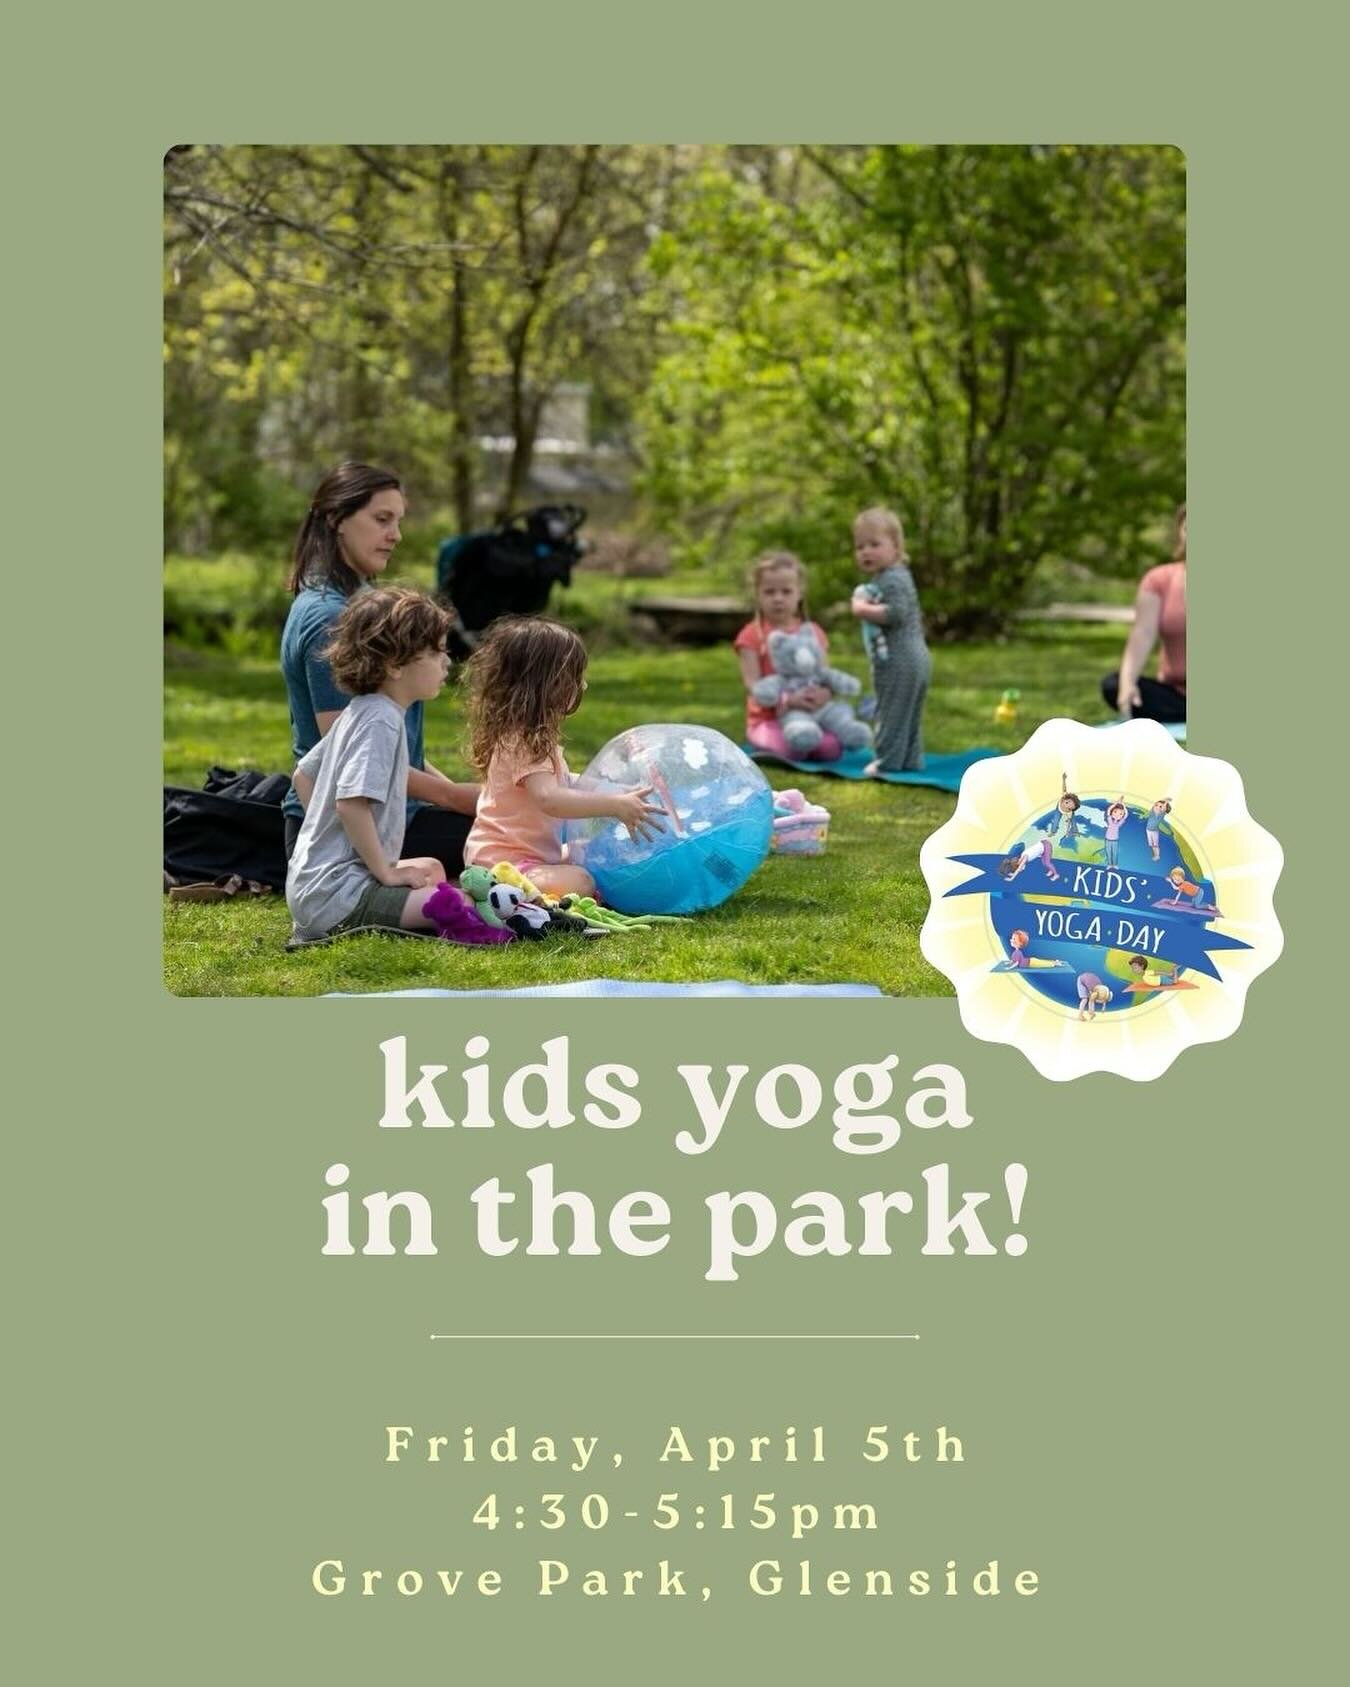 Happy International Kids Yoga Day! 

Come celebrate with a FREE kids yoga event!

When: Friday, April 5th from 4:30-5:15pm
Where: Grove Park, Glenside

Join Miss Courtney and Miss Jana as we lead children, ages 2-8, and their grown-ups, in a fun yoga